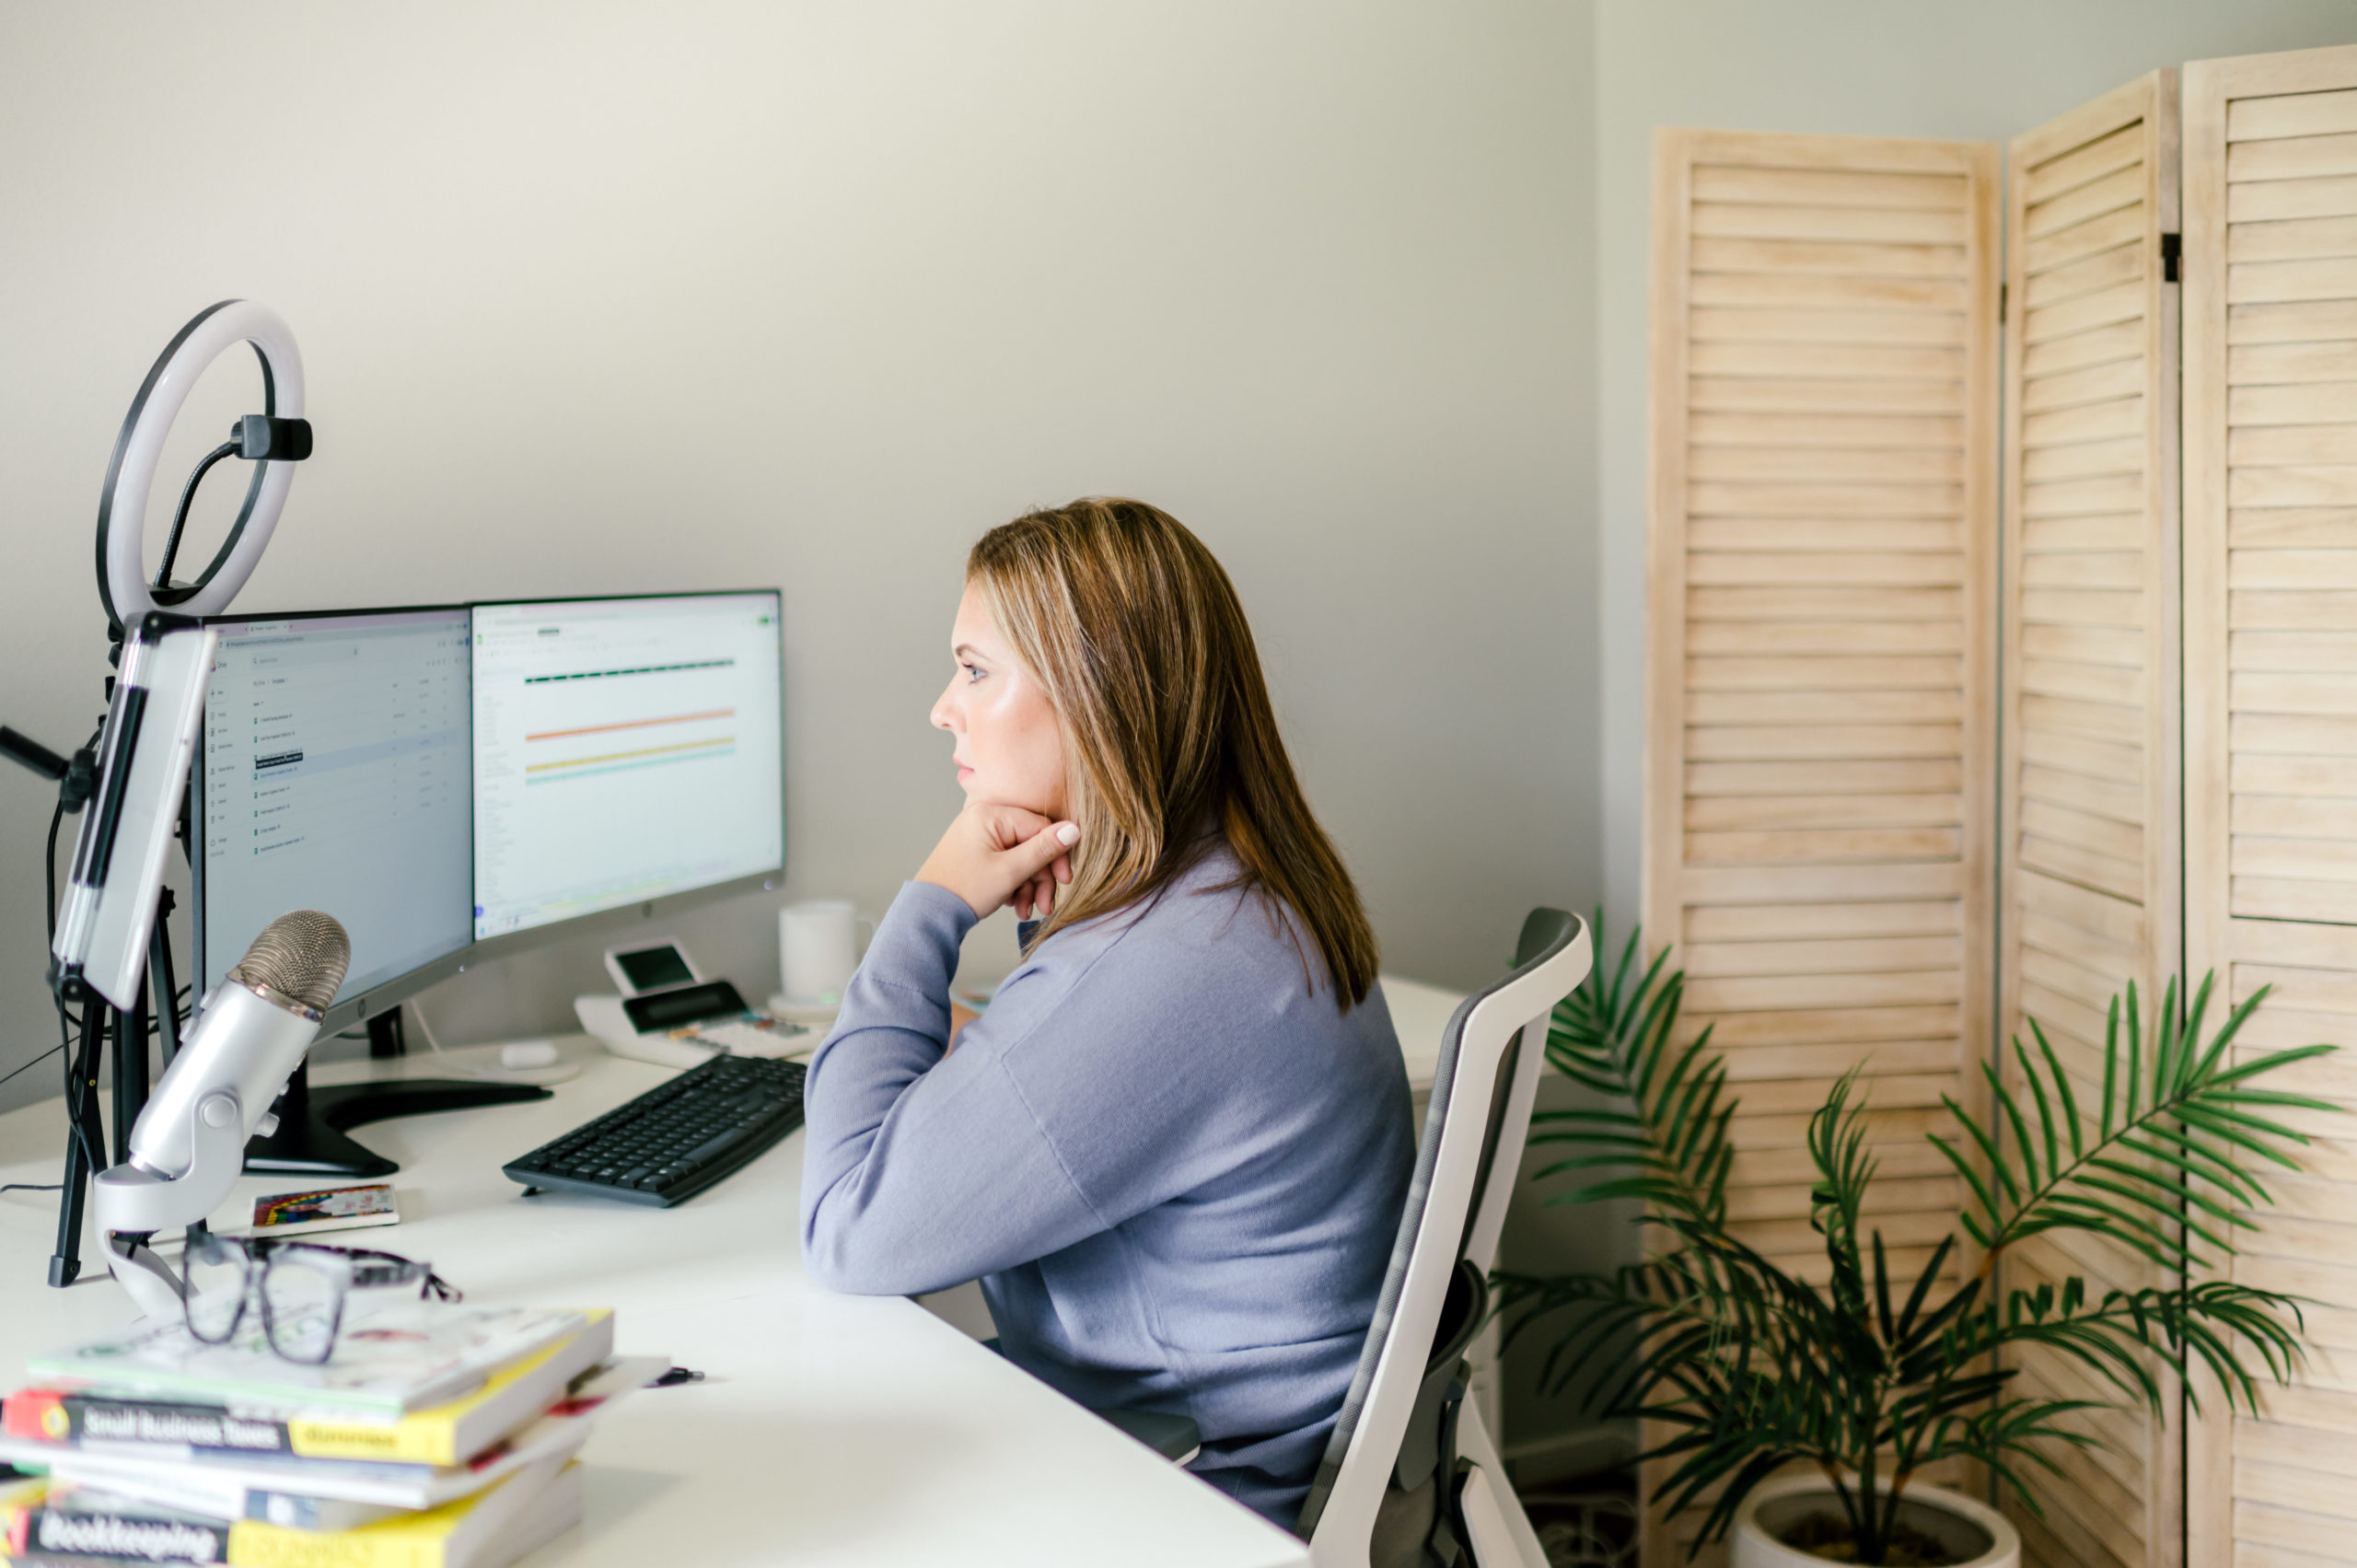 CPA business woman looking at computer screens working at desk in her office